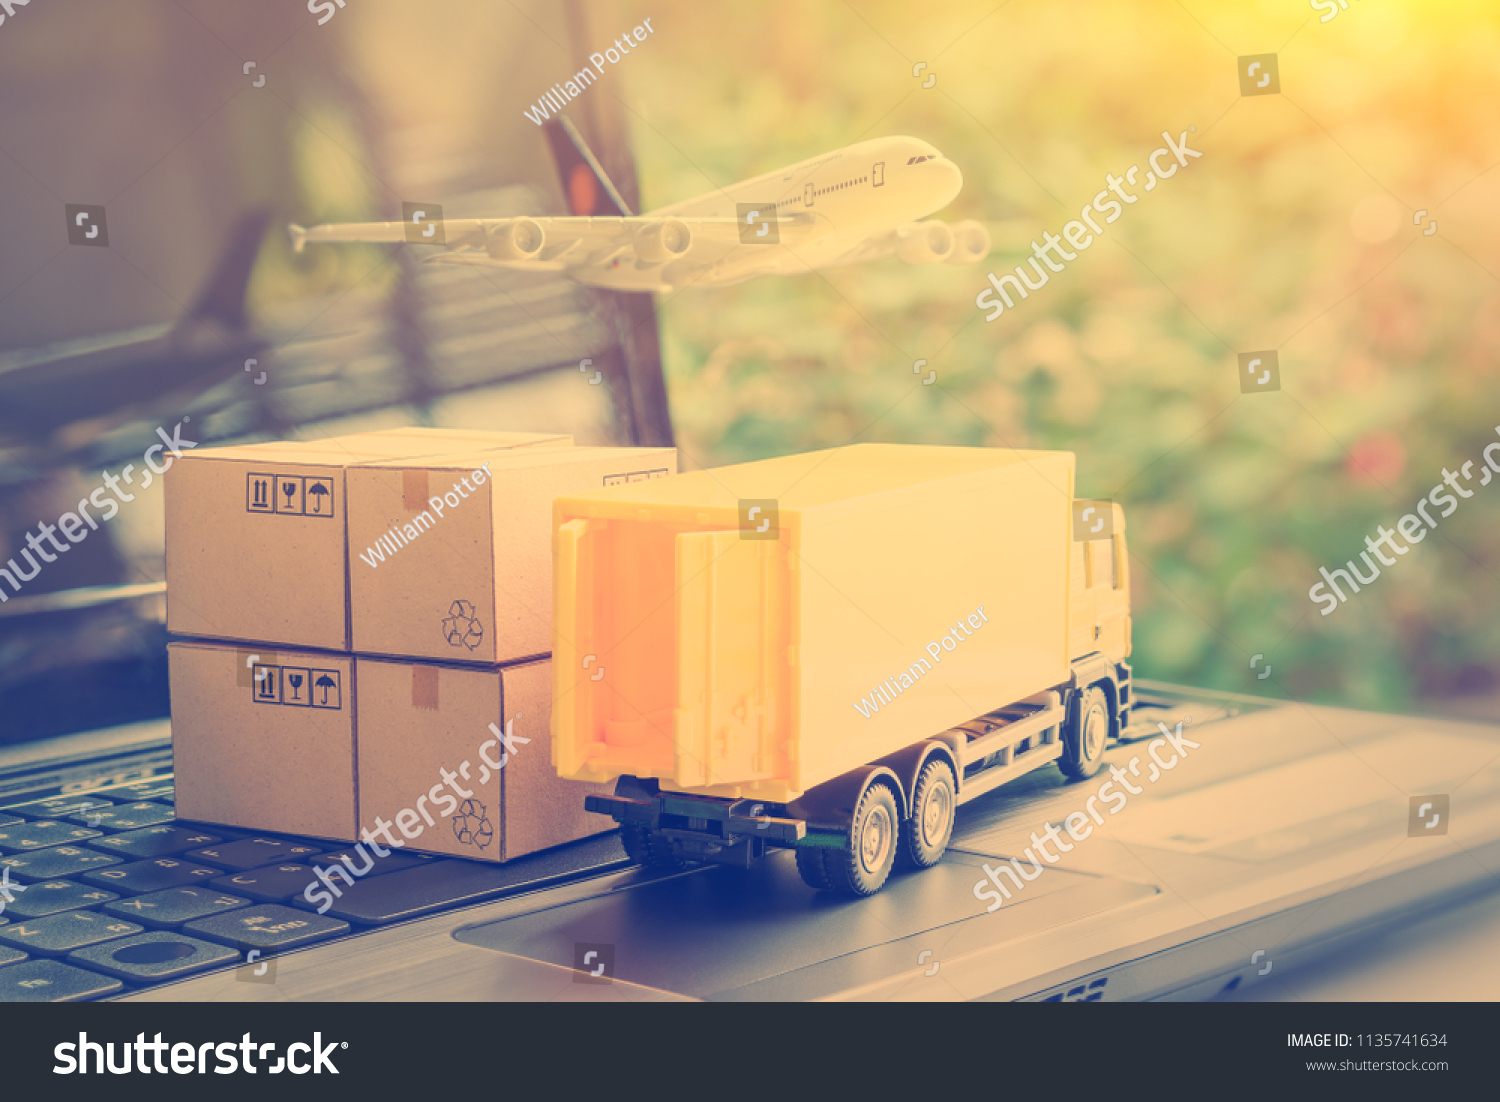 Air courier / freight forwarder or shipping service concept :  Boxes, a truck, white plane flies over a laptop, depicts customers order things from retailer sites via the internet and ship worldwide. #1135741634